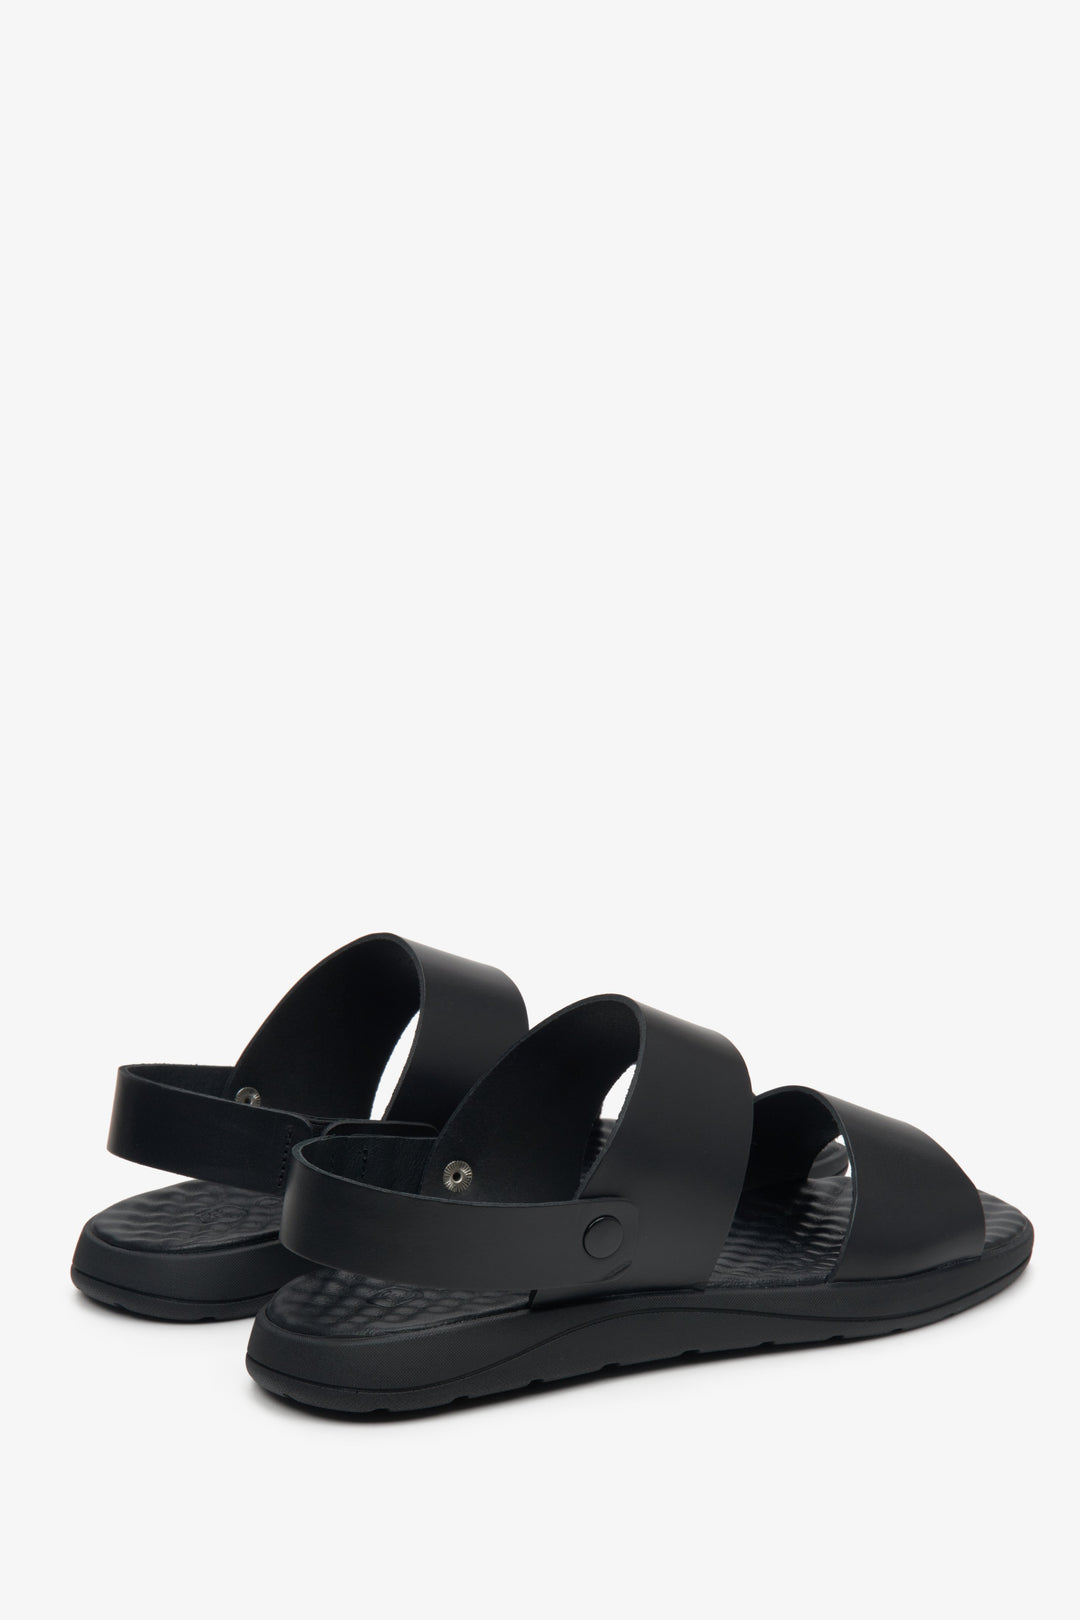 Men's black sandals by Estro with thick straps - perfect for summer.